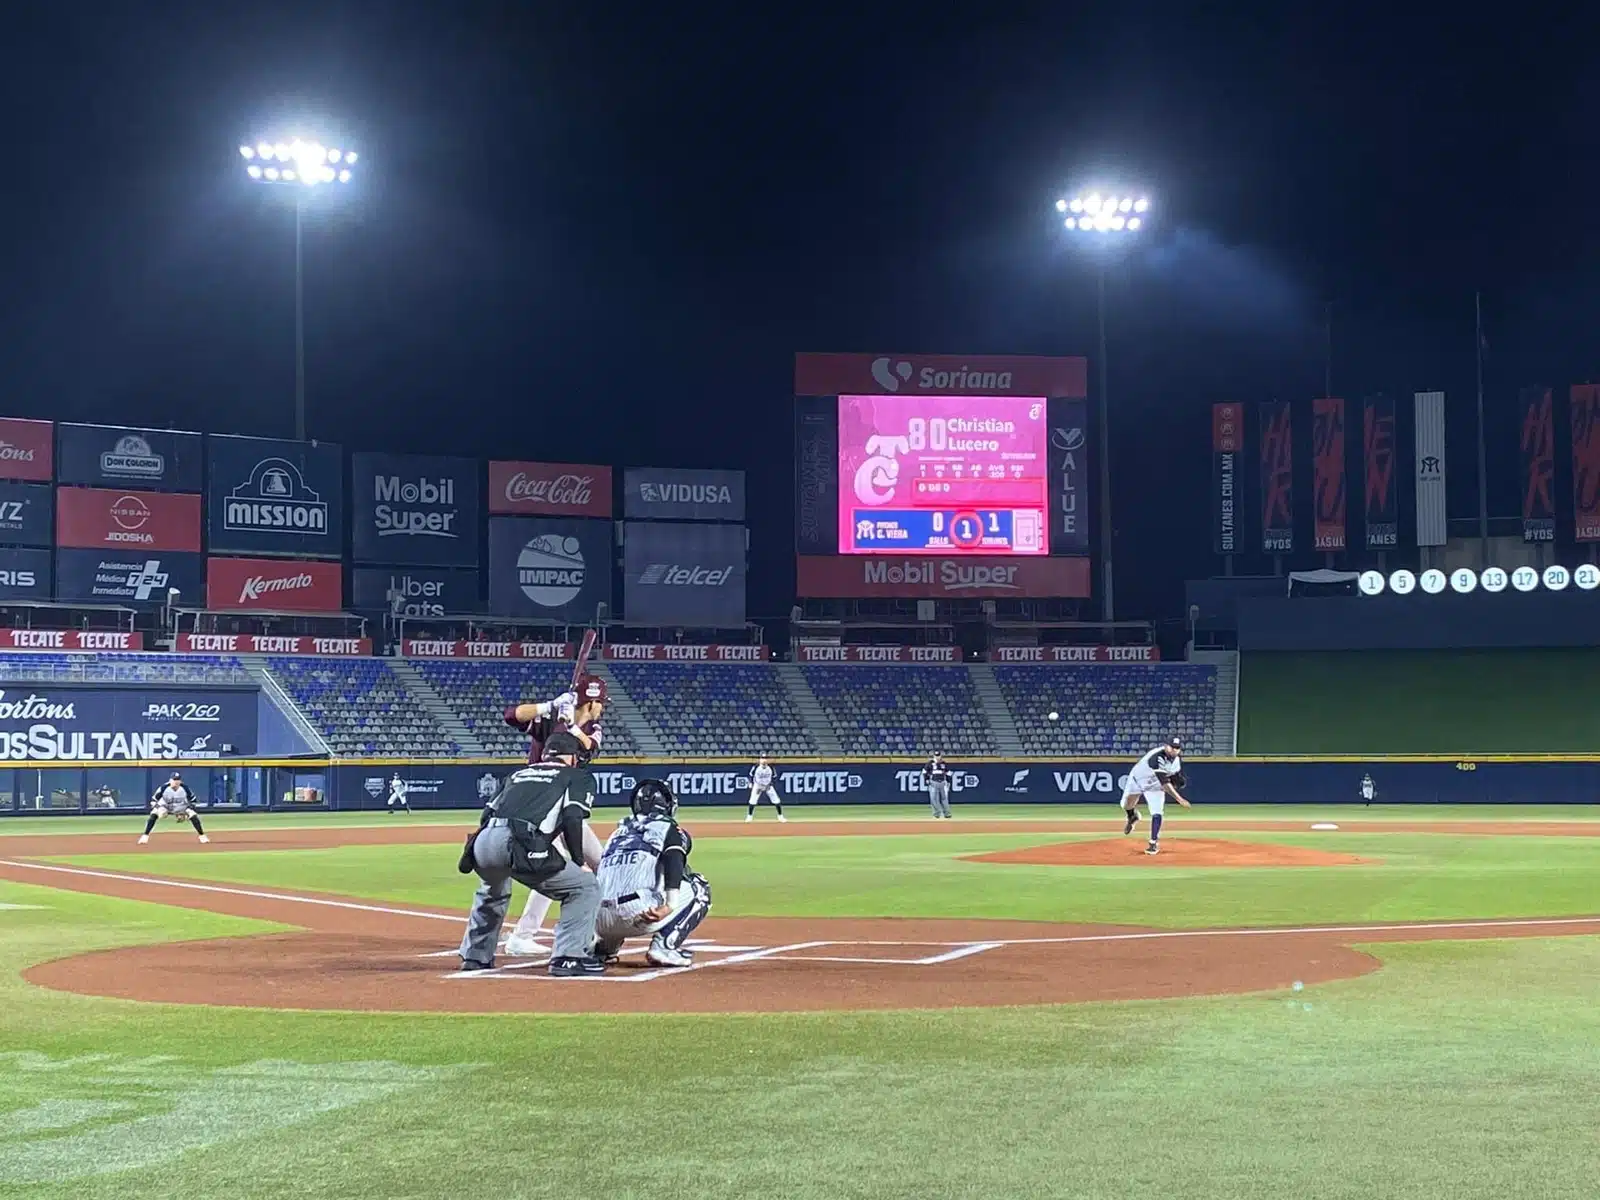 LMP: Sultanes rumbo a play-offs, vencen a Culiacán